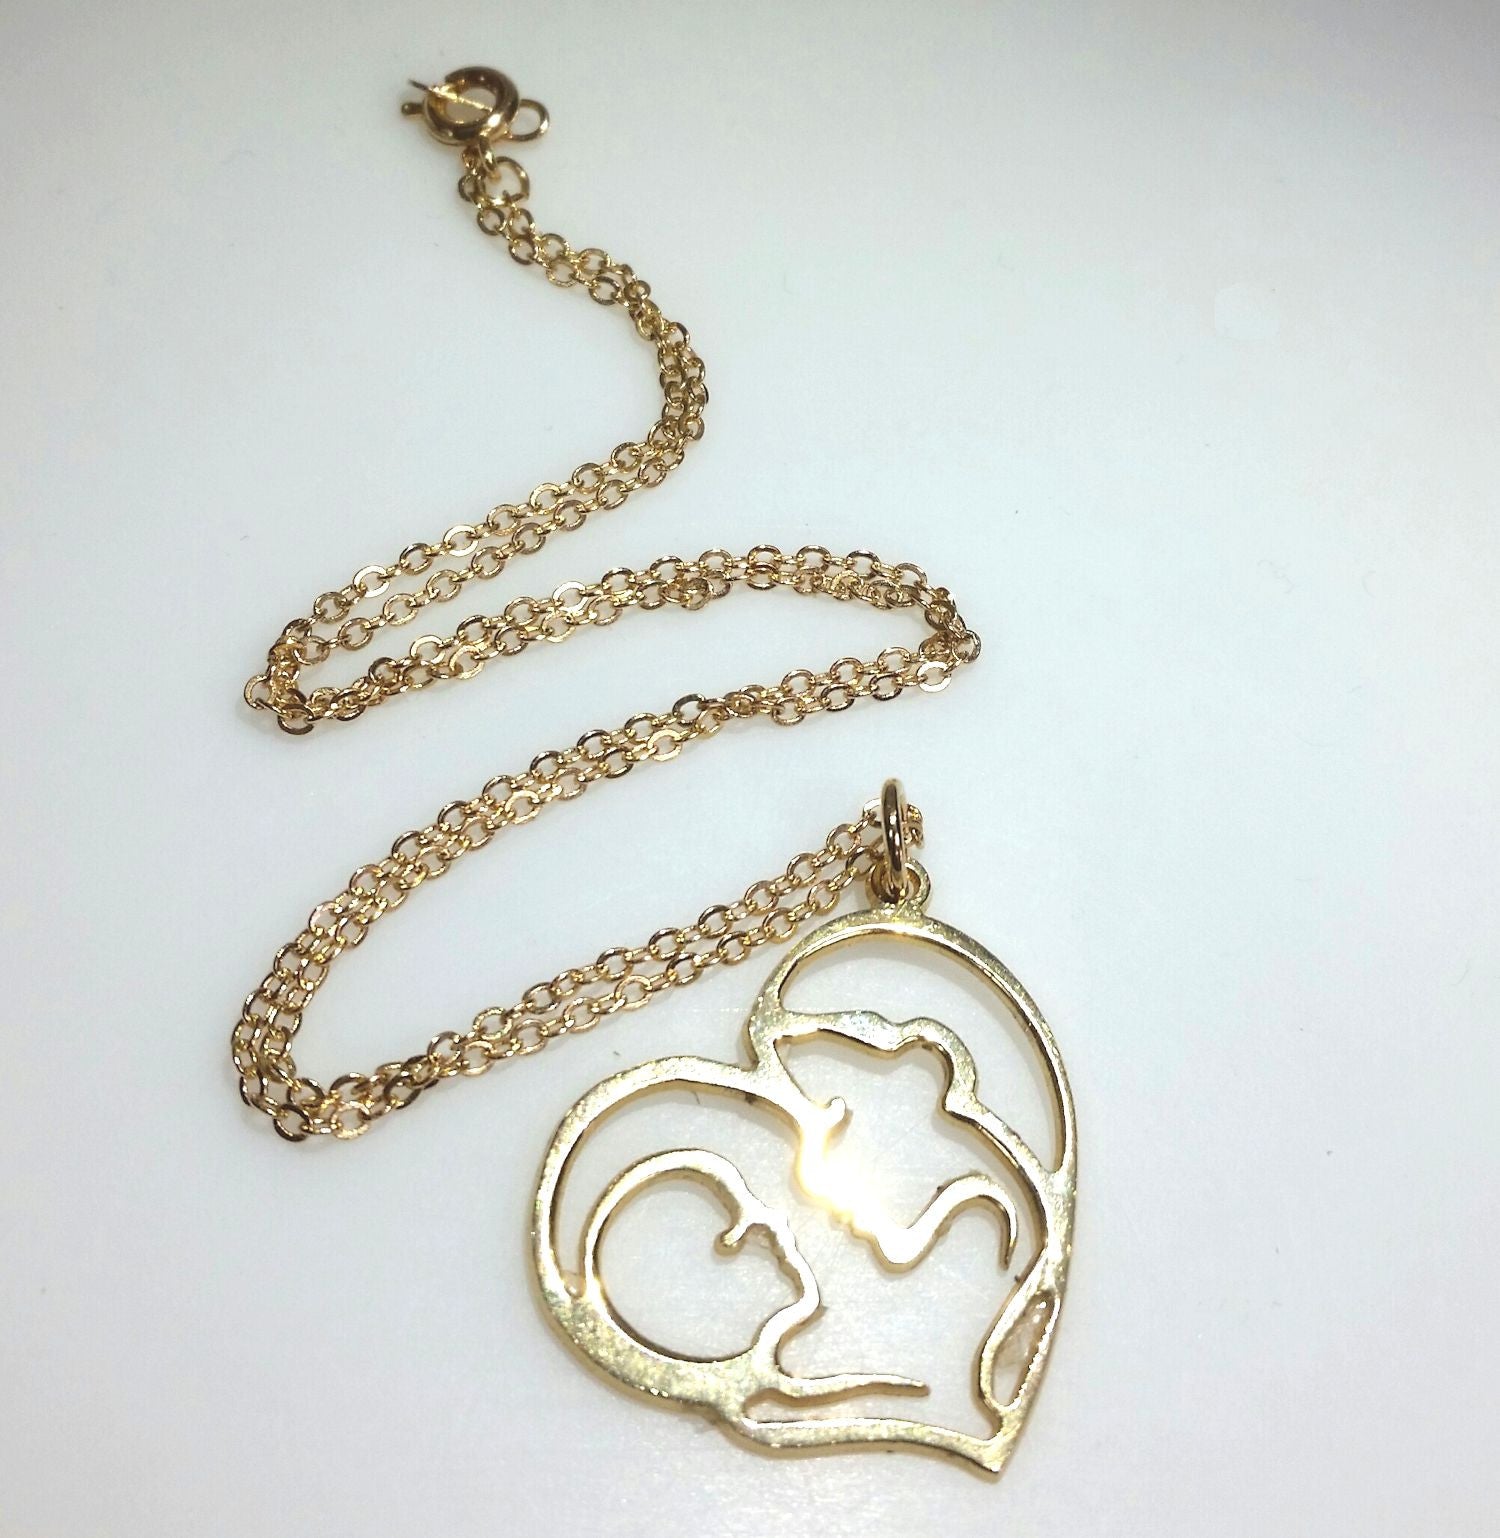 Gold Pendant Necklace - Mother Daughter Gift - 14K Gold Filled Jewelry 19 inch (47cm)